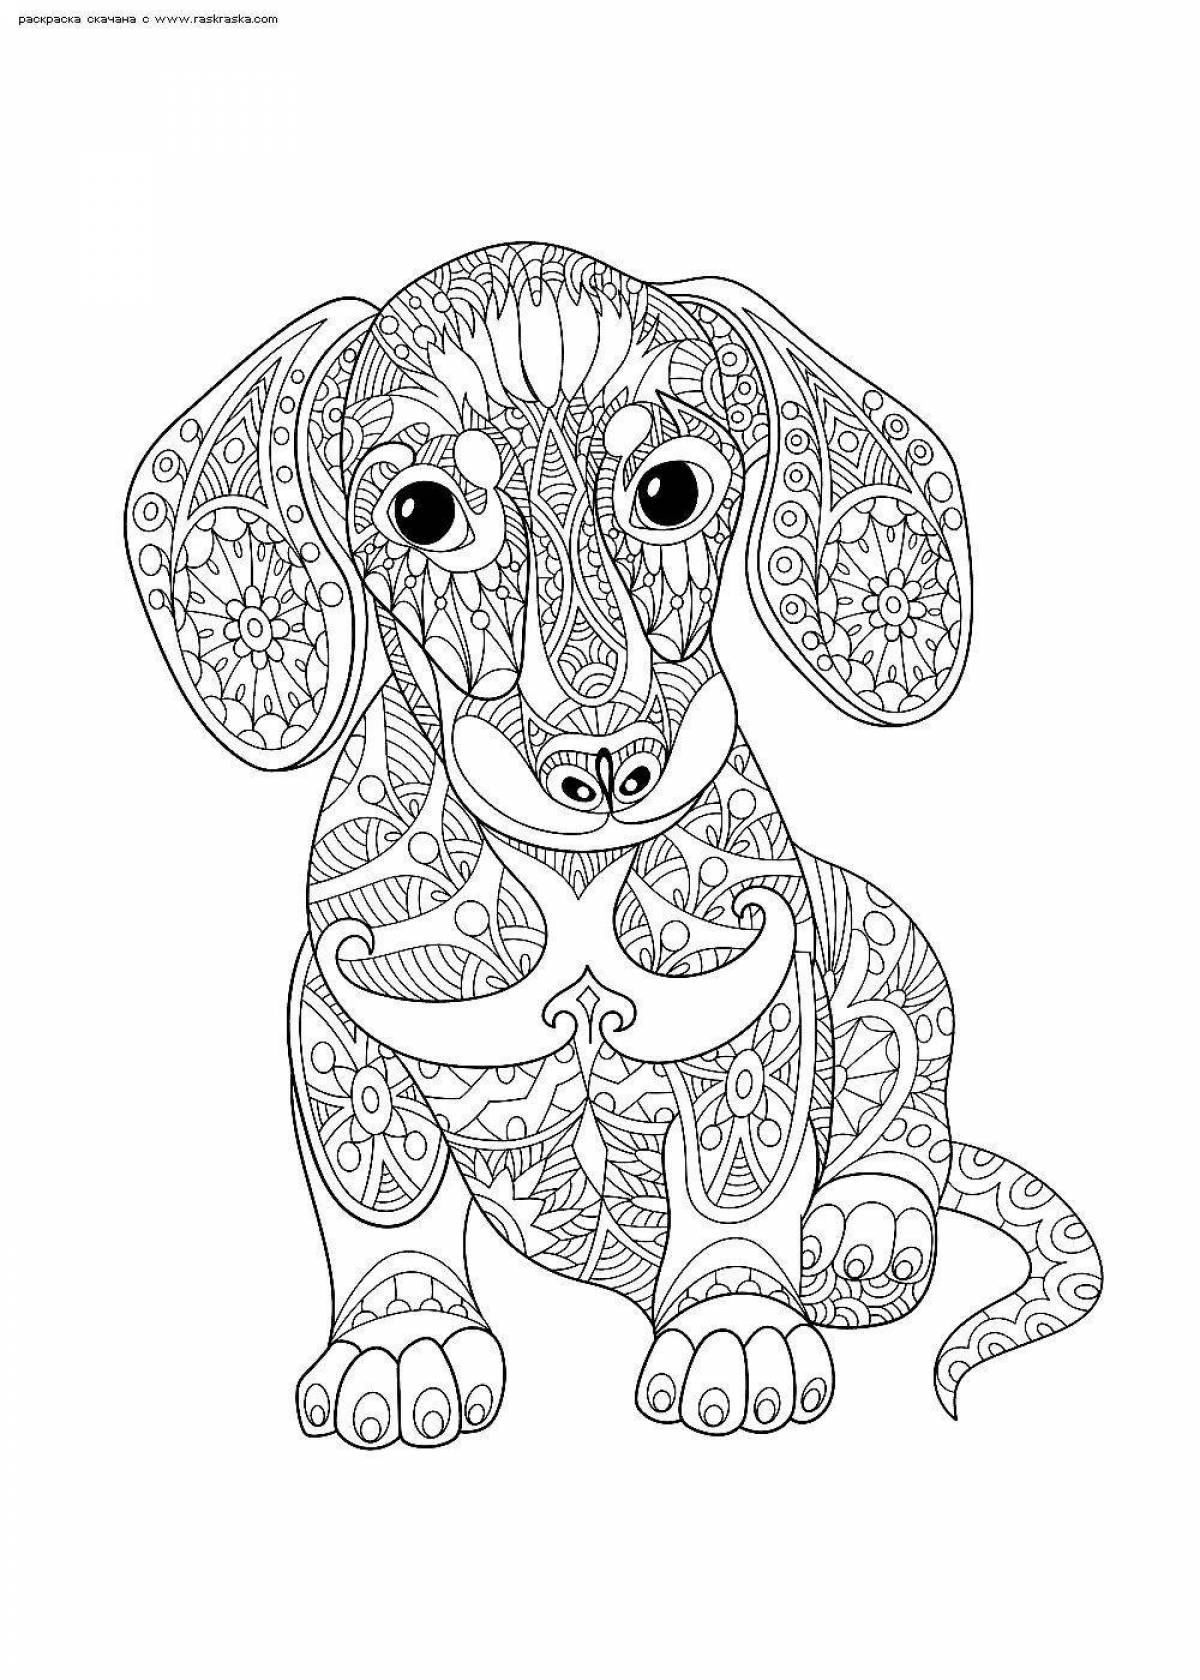 Cunning snake coloring page